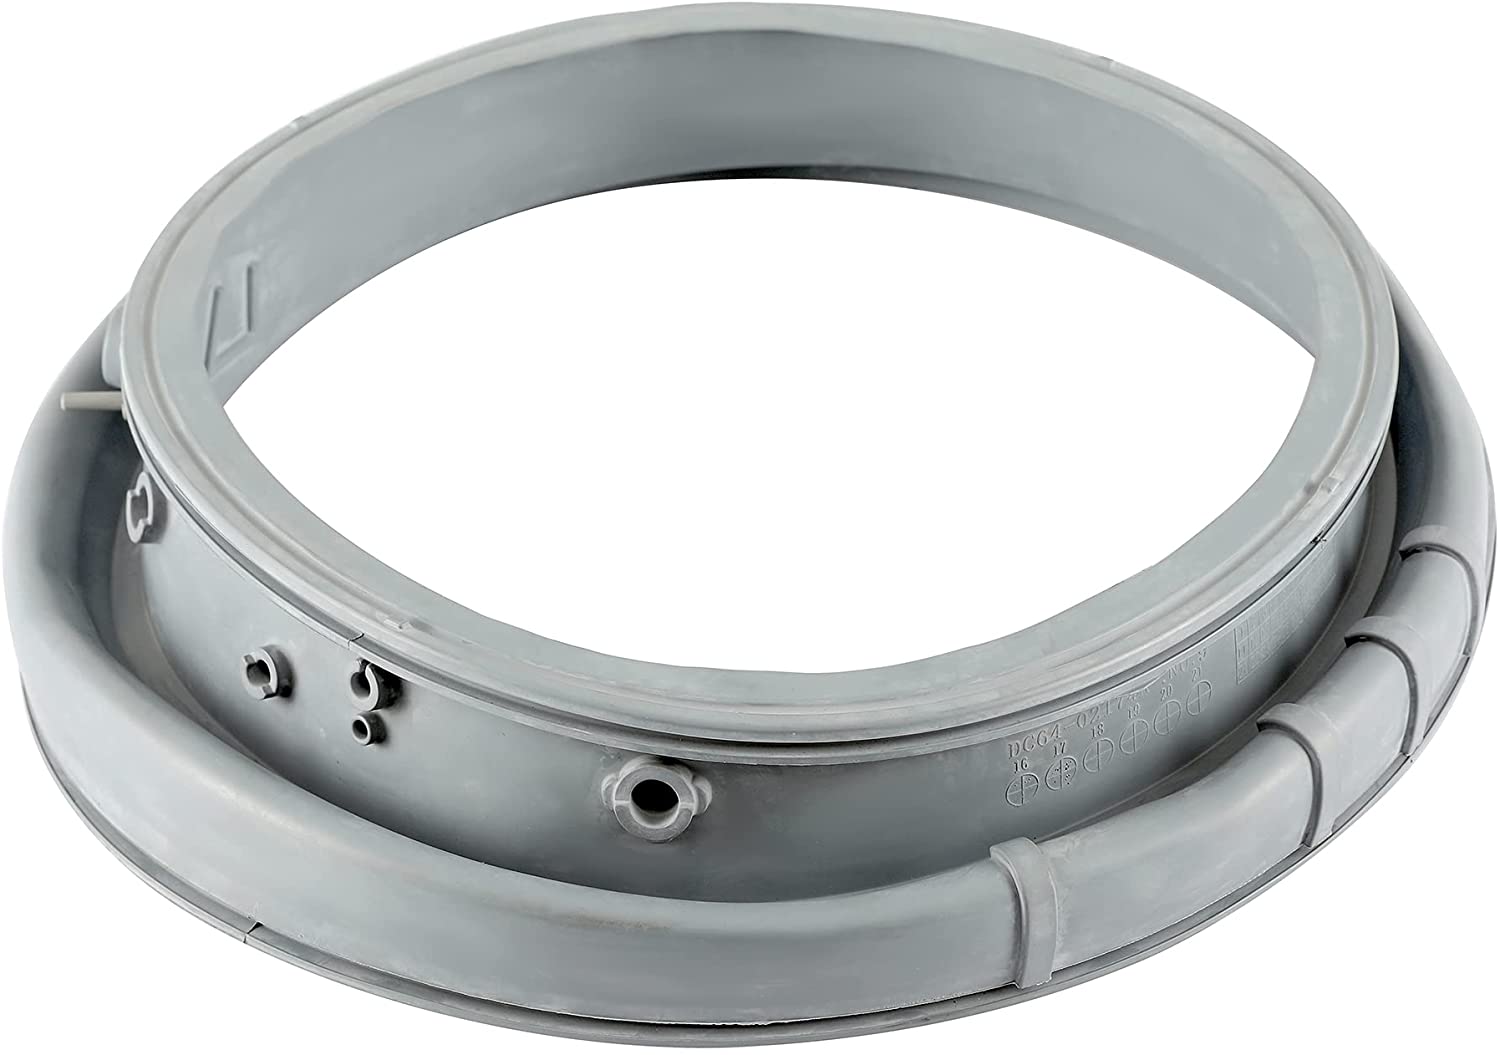 Samsung Washer Diaphragm Assembly. Part #DC97-16140P